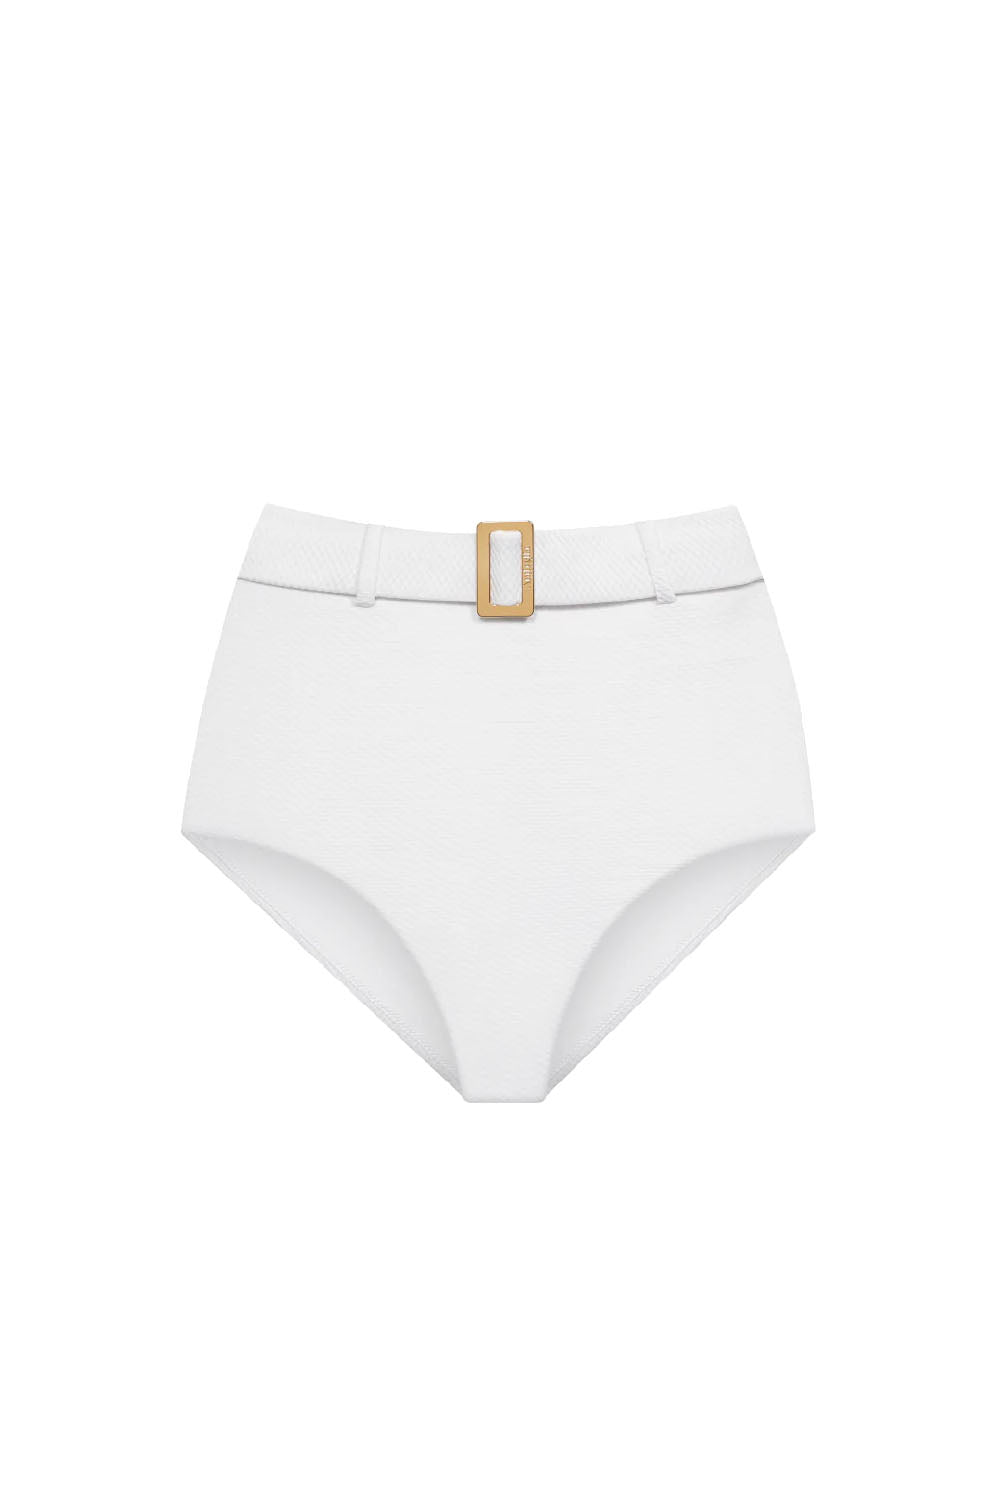 The belted Brief Ivory